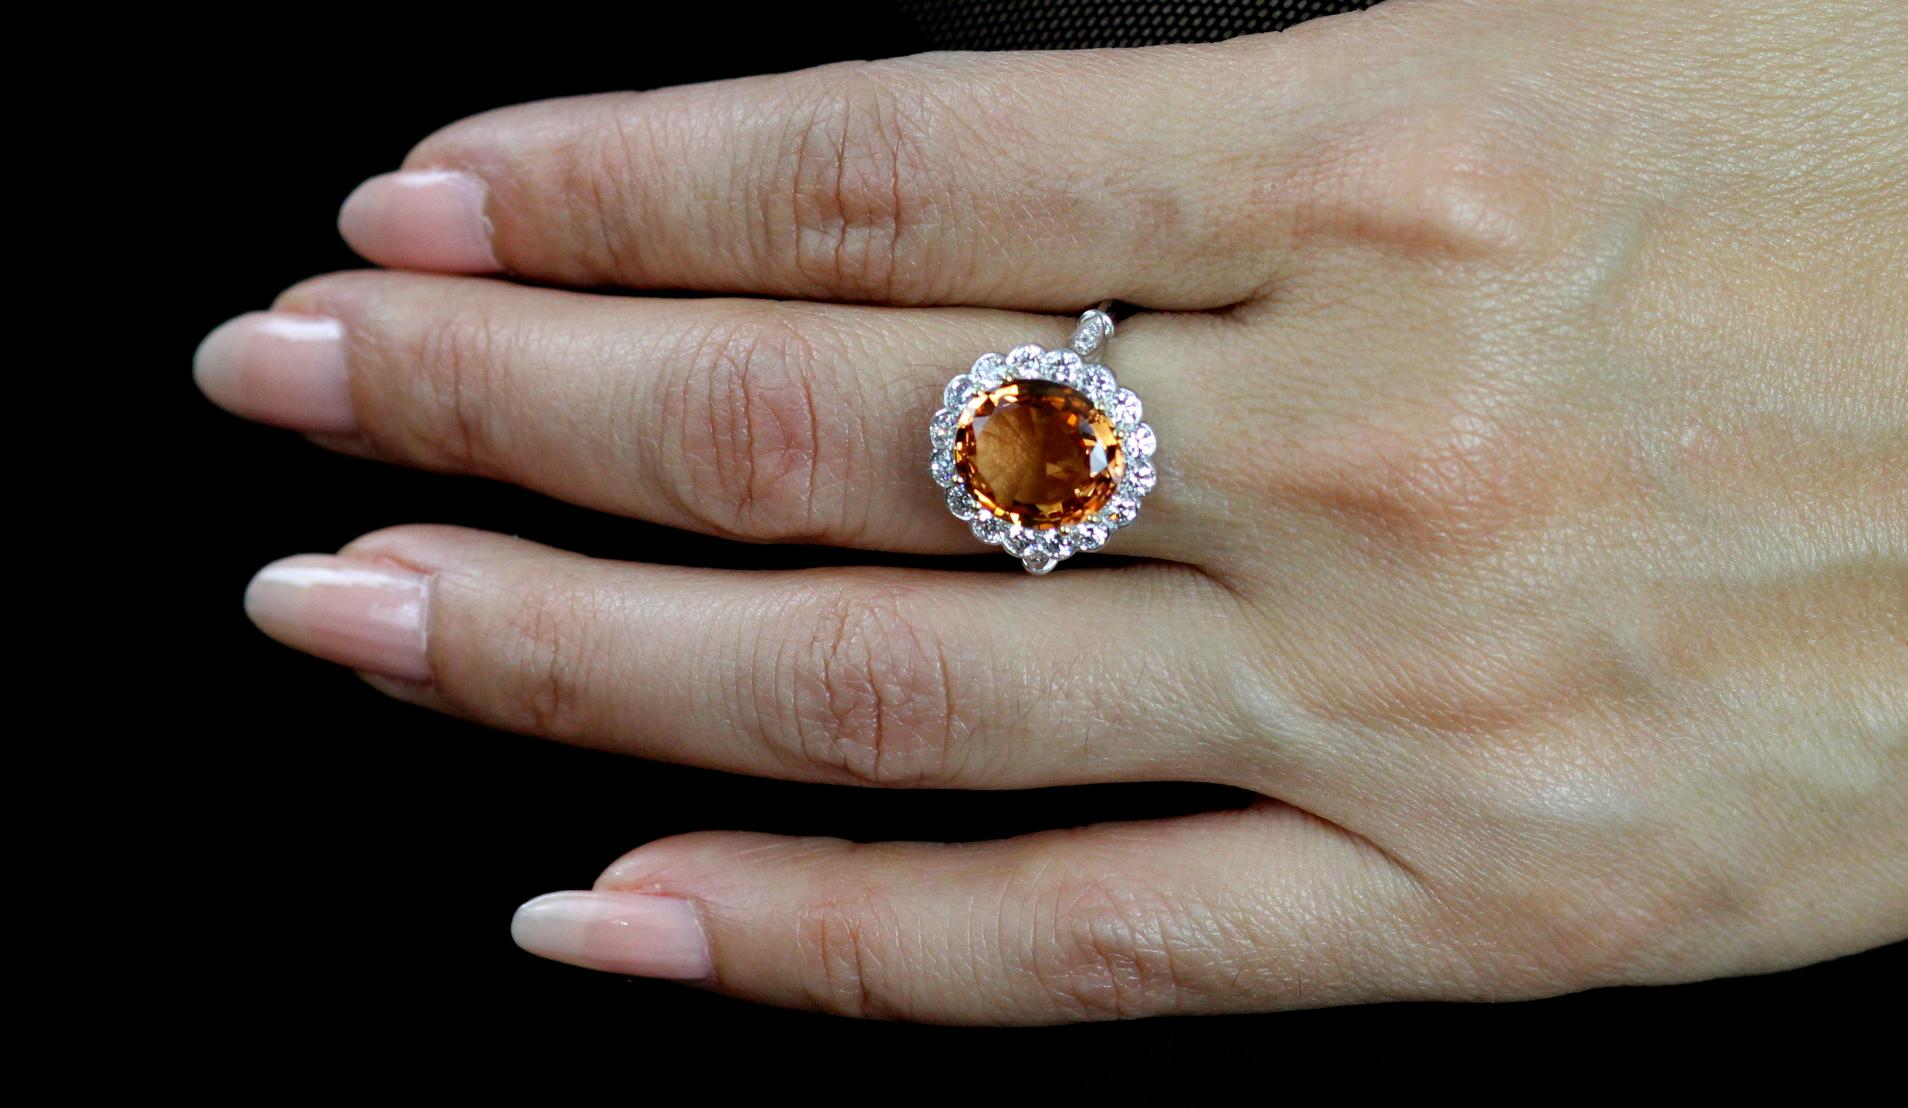 Oval Cut Brazilian Imperial Topaz Orange Color 4.8ct and Diamond Cluster Ring in Platinum